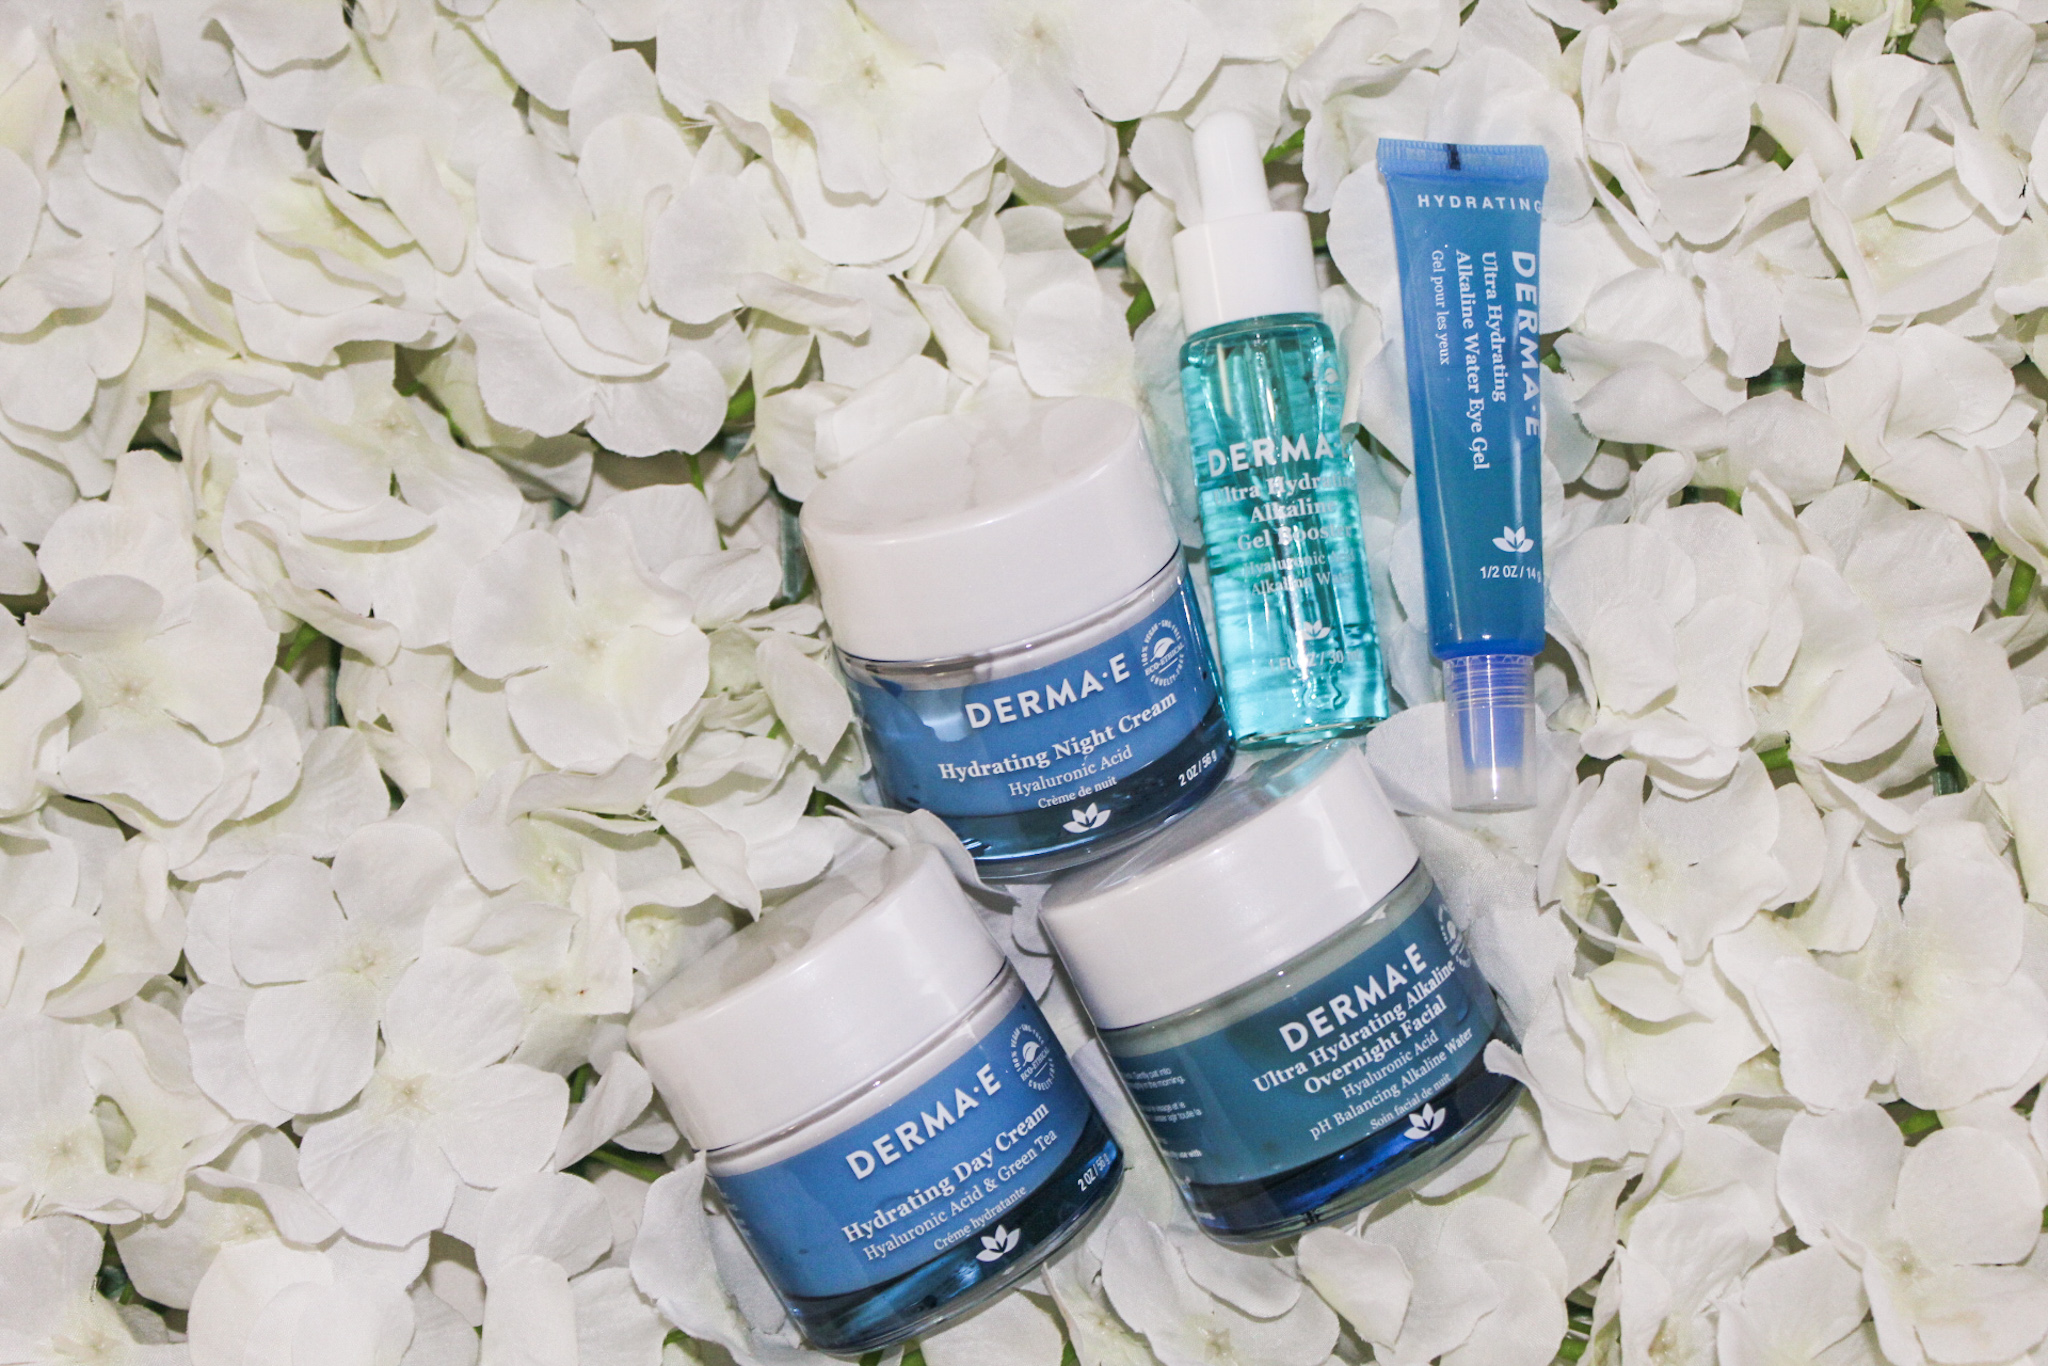 Out of the box derma e hydrating line products